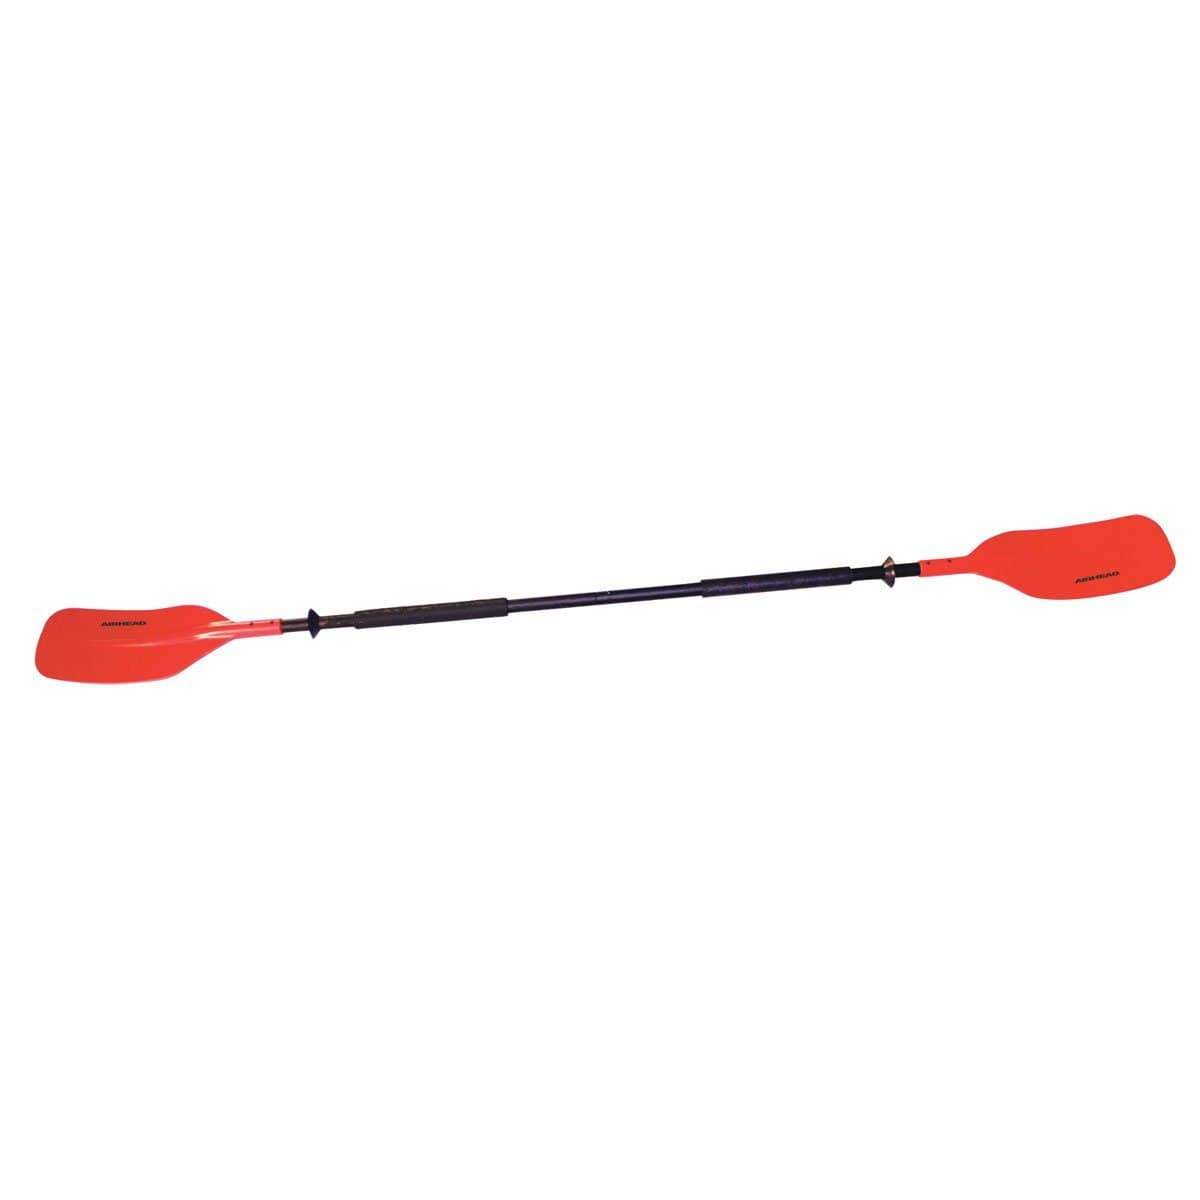 AIRHEAD Deluxe Kayak Paddle 2-Section 92" Curved Blade #AHTK-P2